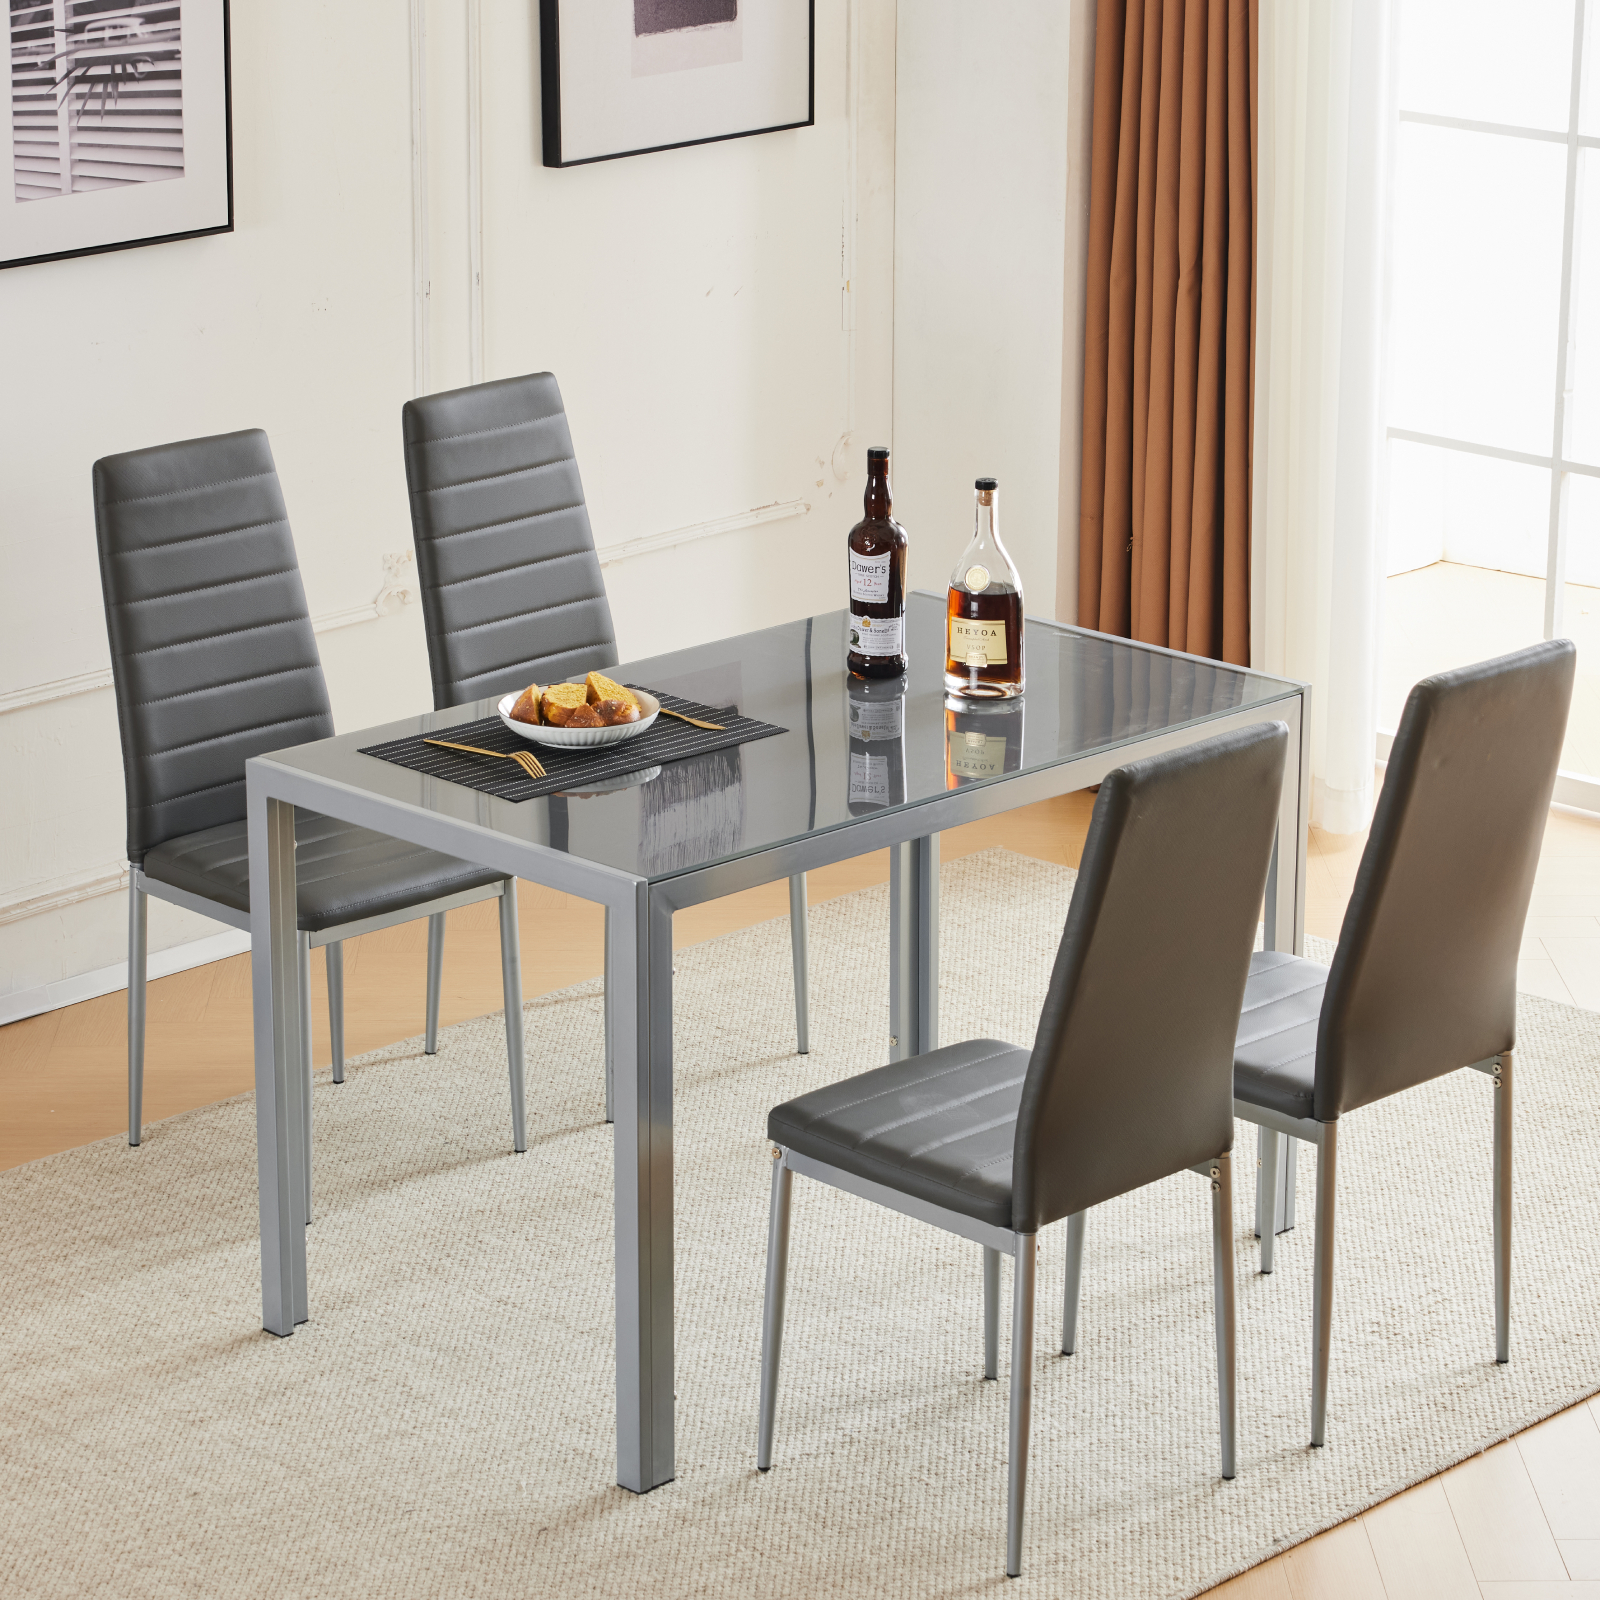 Ktaxon 5 Pieces Kitchen Table Set  Dining Table withTempered Glass Top and 4 Chairs Dinner Table for Dining Room Furniture Gray - image 1 of 7